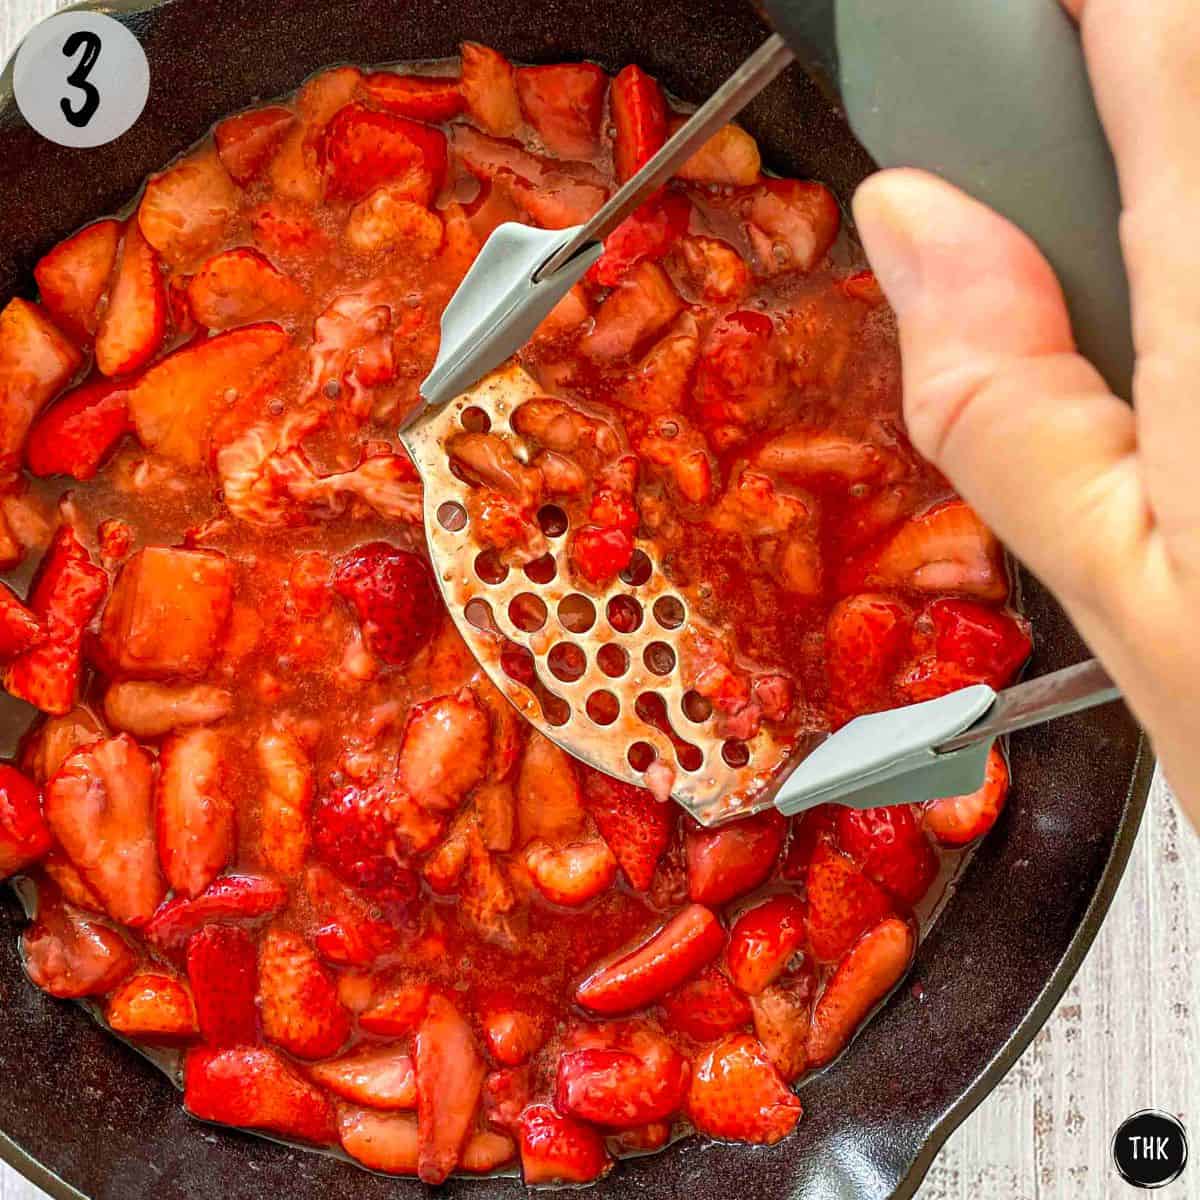 Strawberries being mashed with potato masher inside pan.